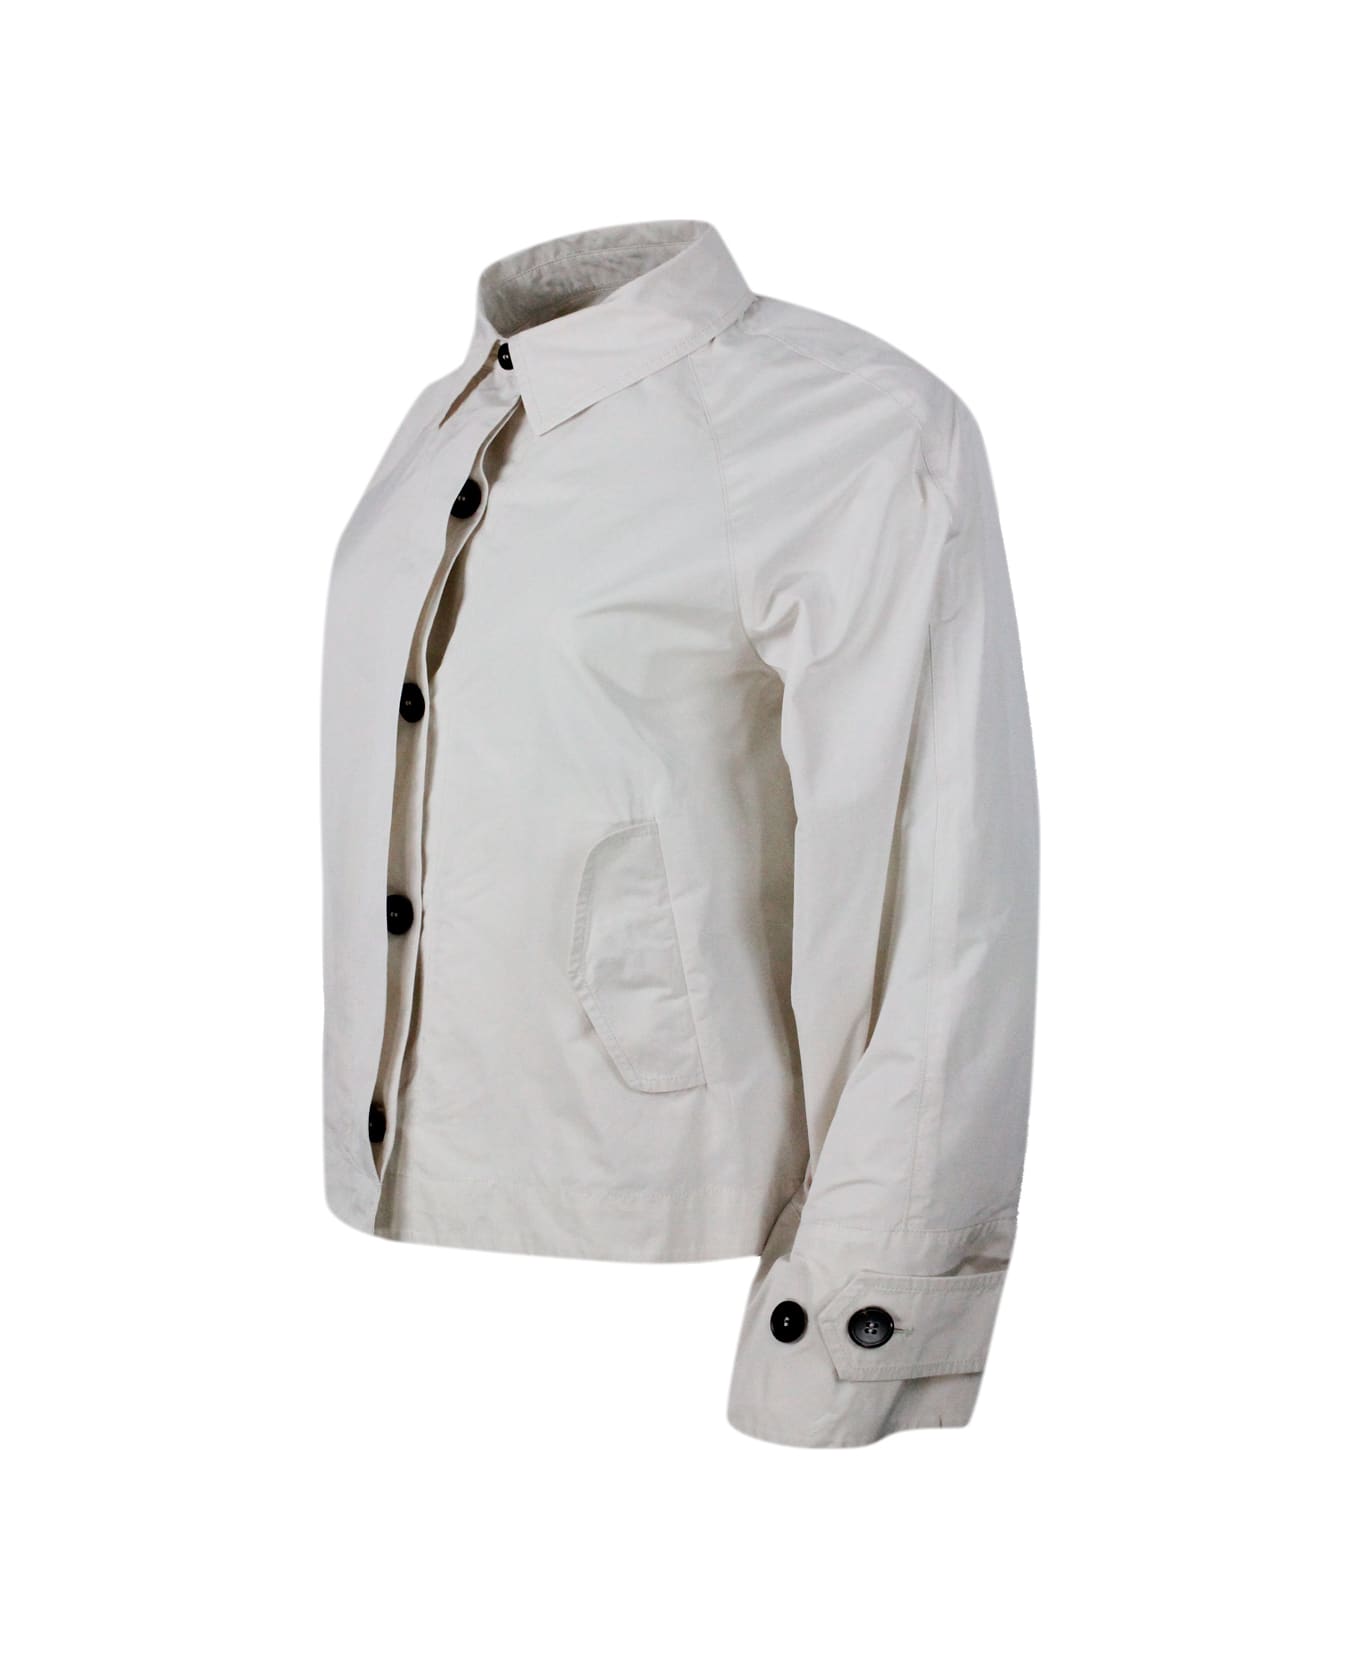 Antonelli Lightweight Windproof Jacket With Shirt Collar, Button Closure And Side Pockets - cream